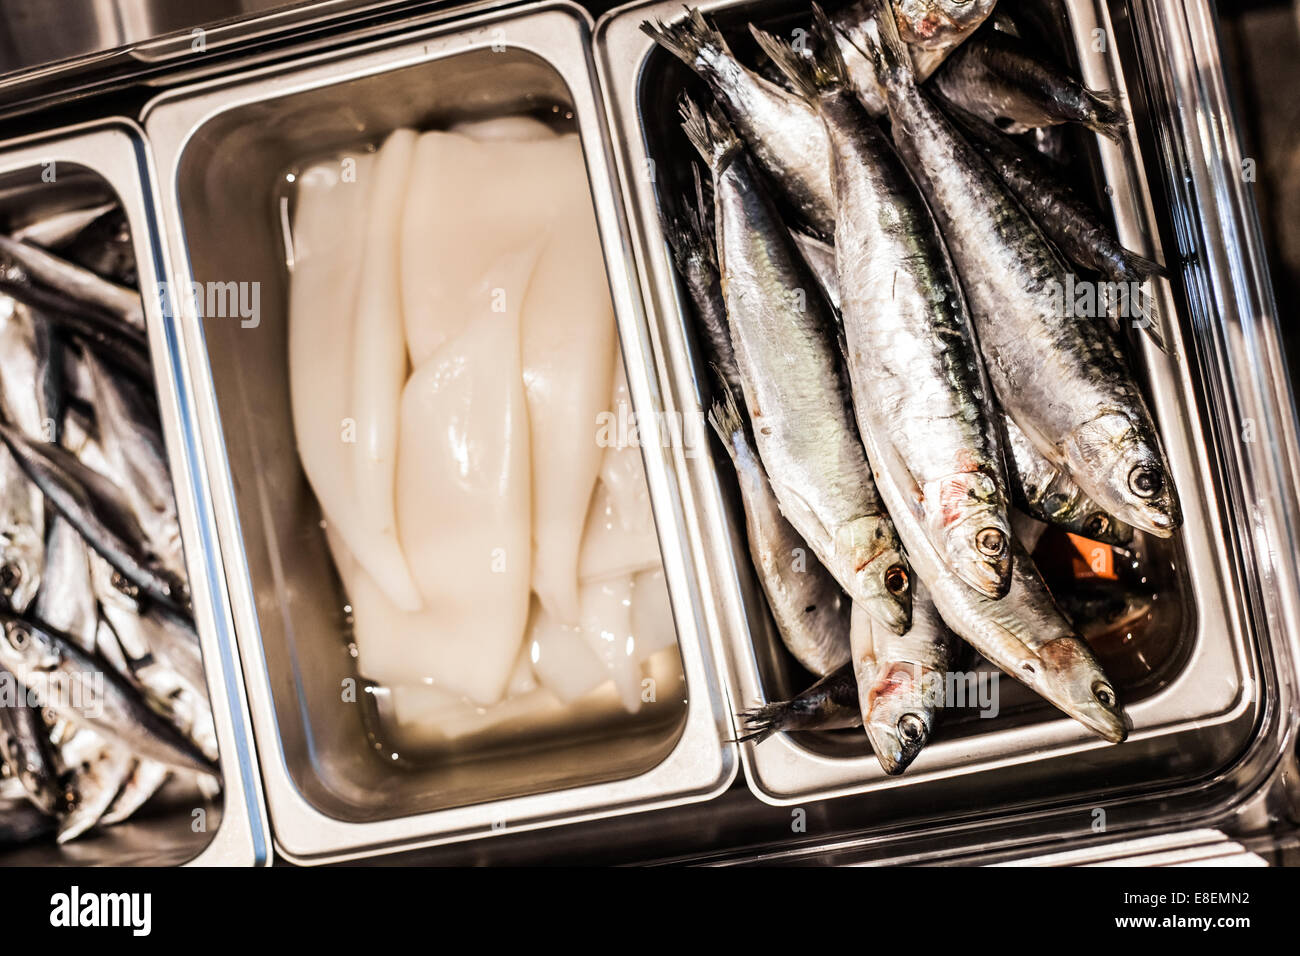 Raw Sardine and Calamare details in a tray of a Portuguese restaurant Stock Photo